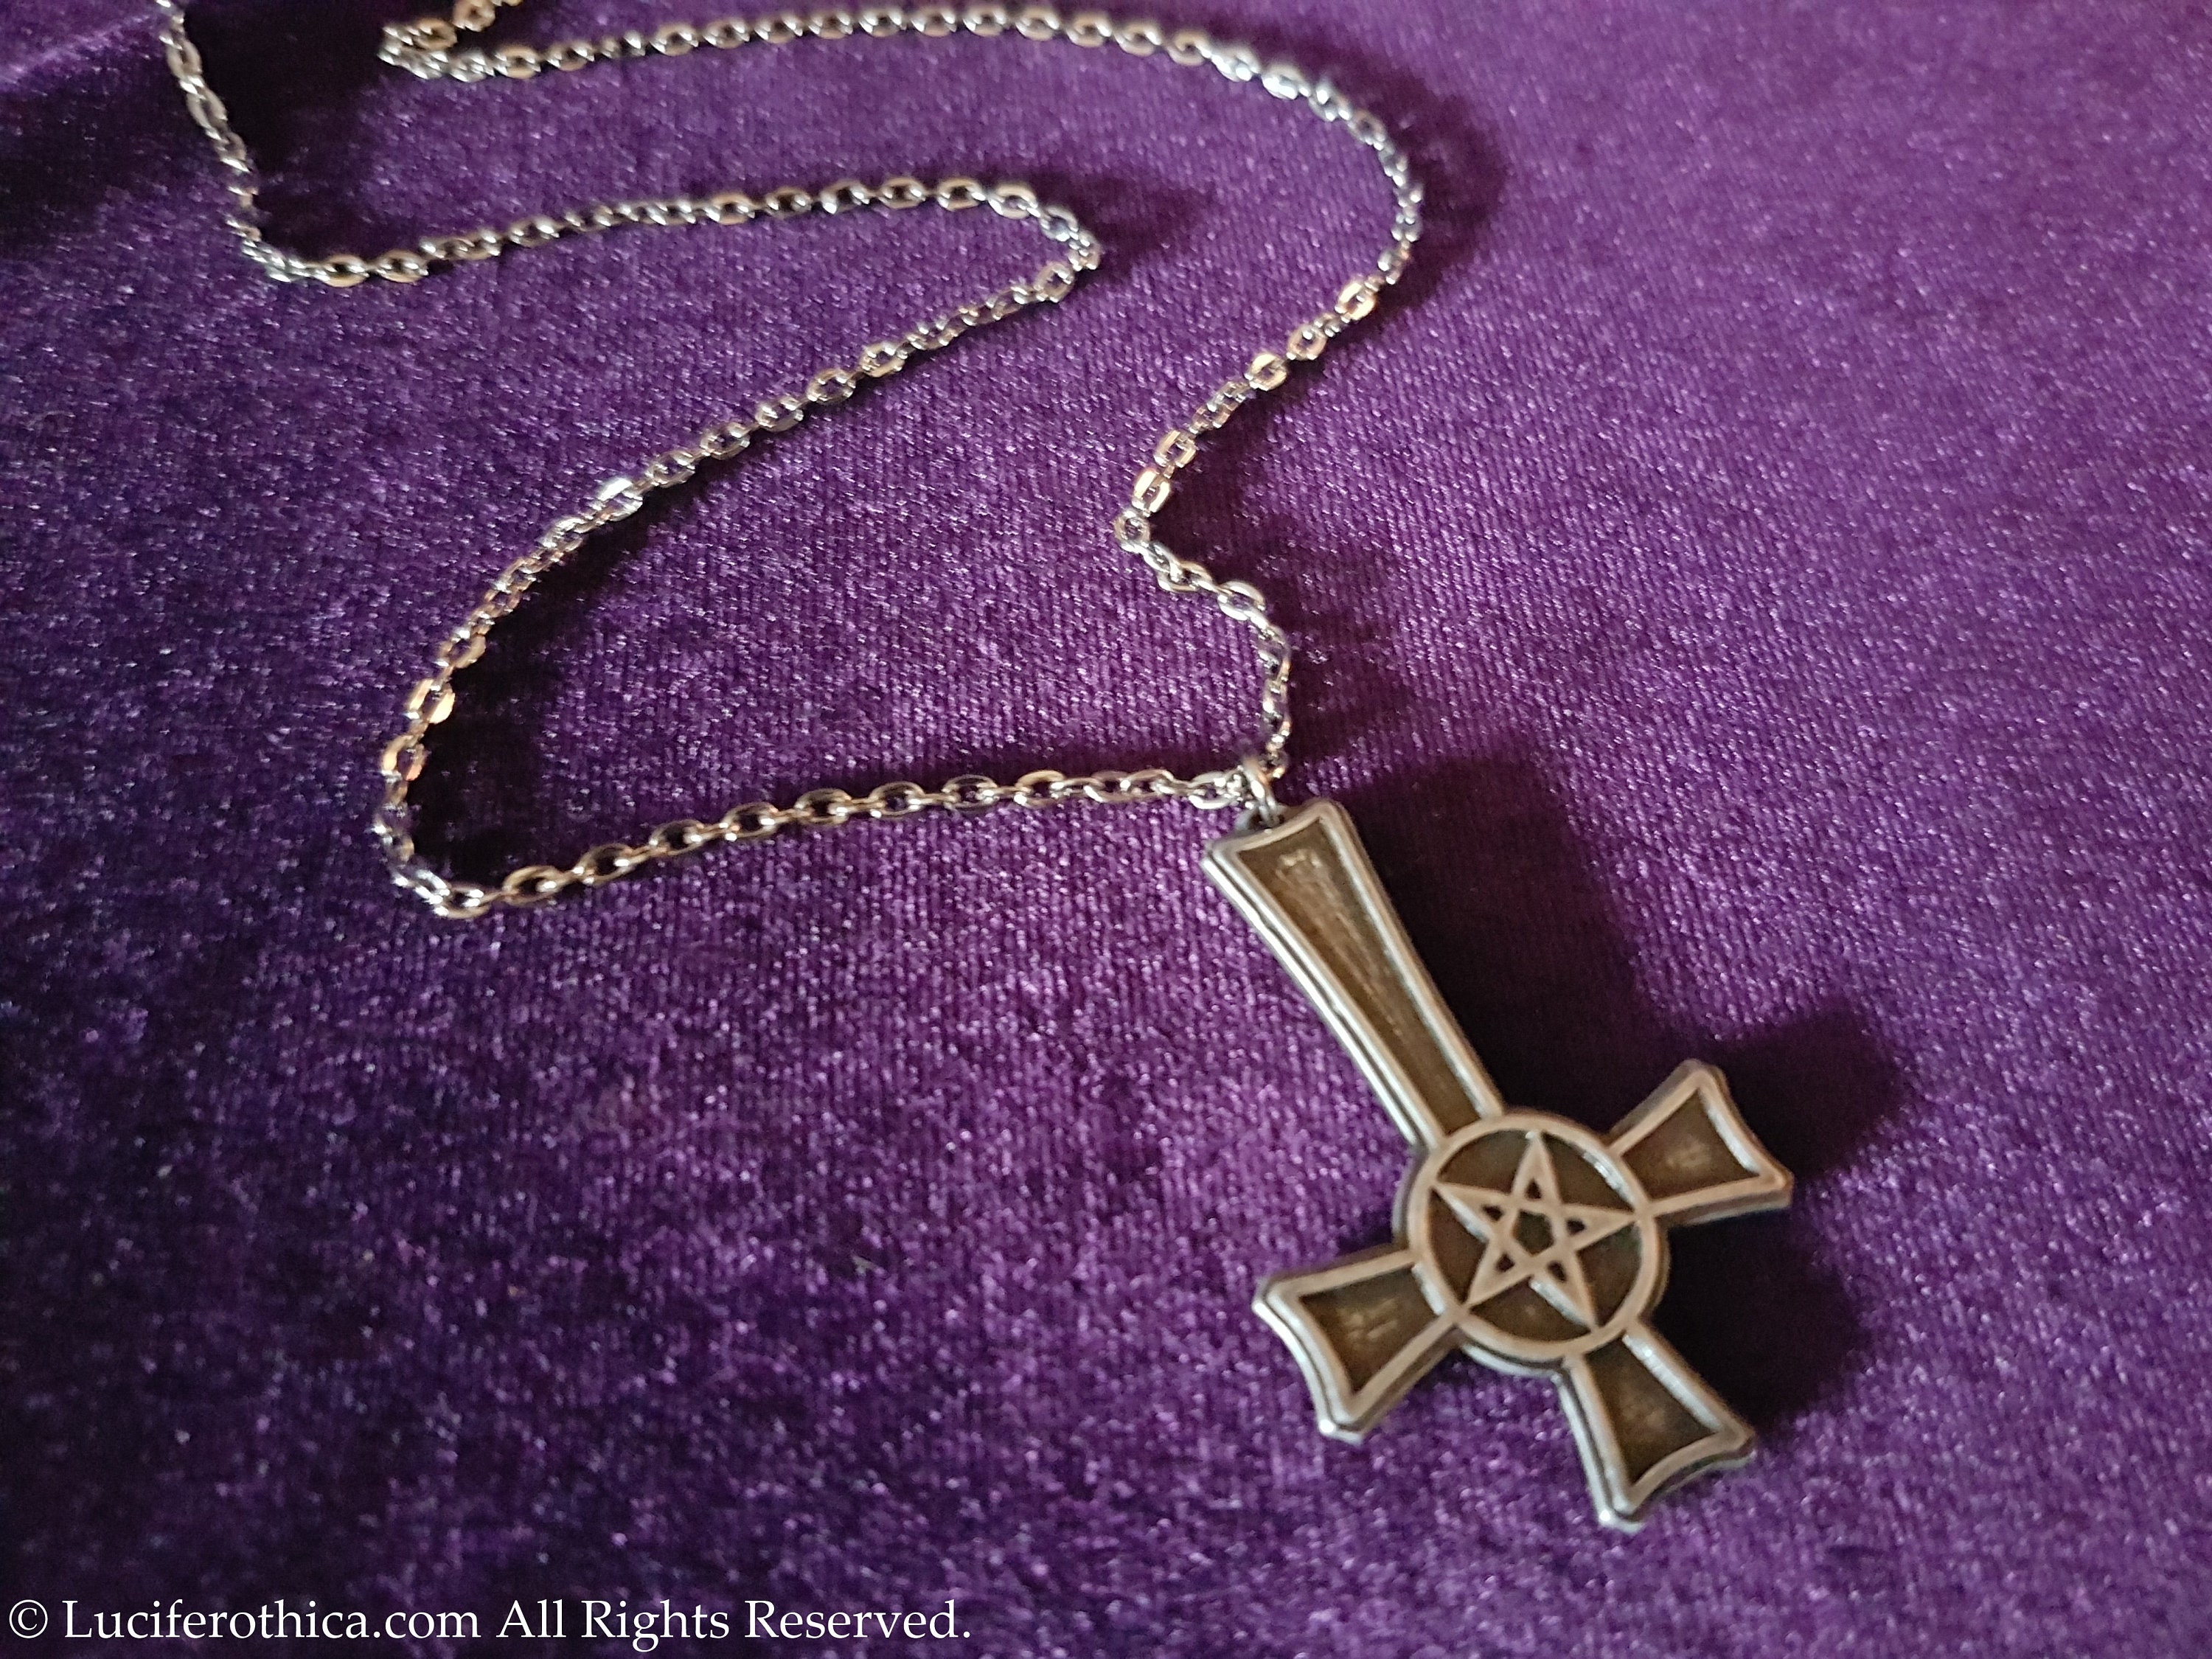 Buy Inverted Cross Necklace Online in India - Etsy